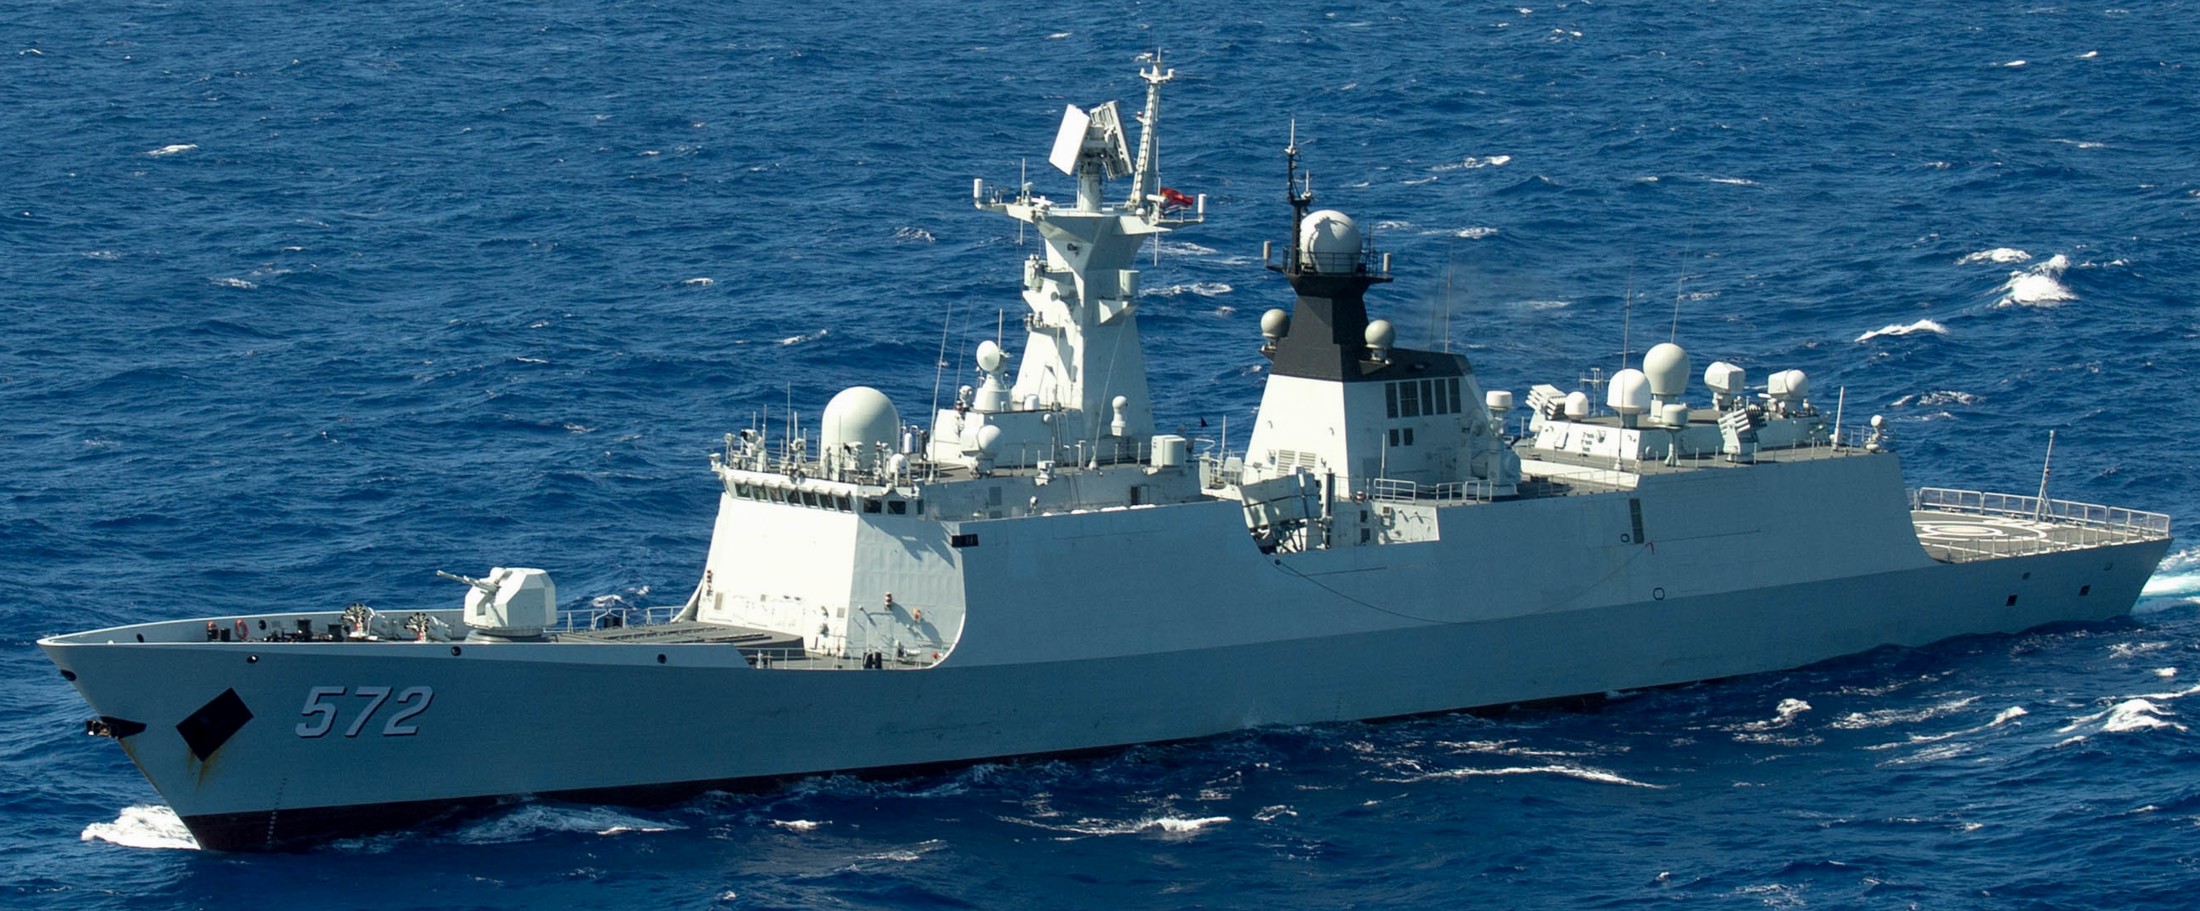 ffg-572 plans hengshui type 054a jiangkai ii class guided missile frigate china people's liberation army navy 13